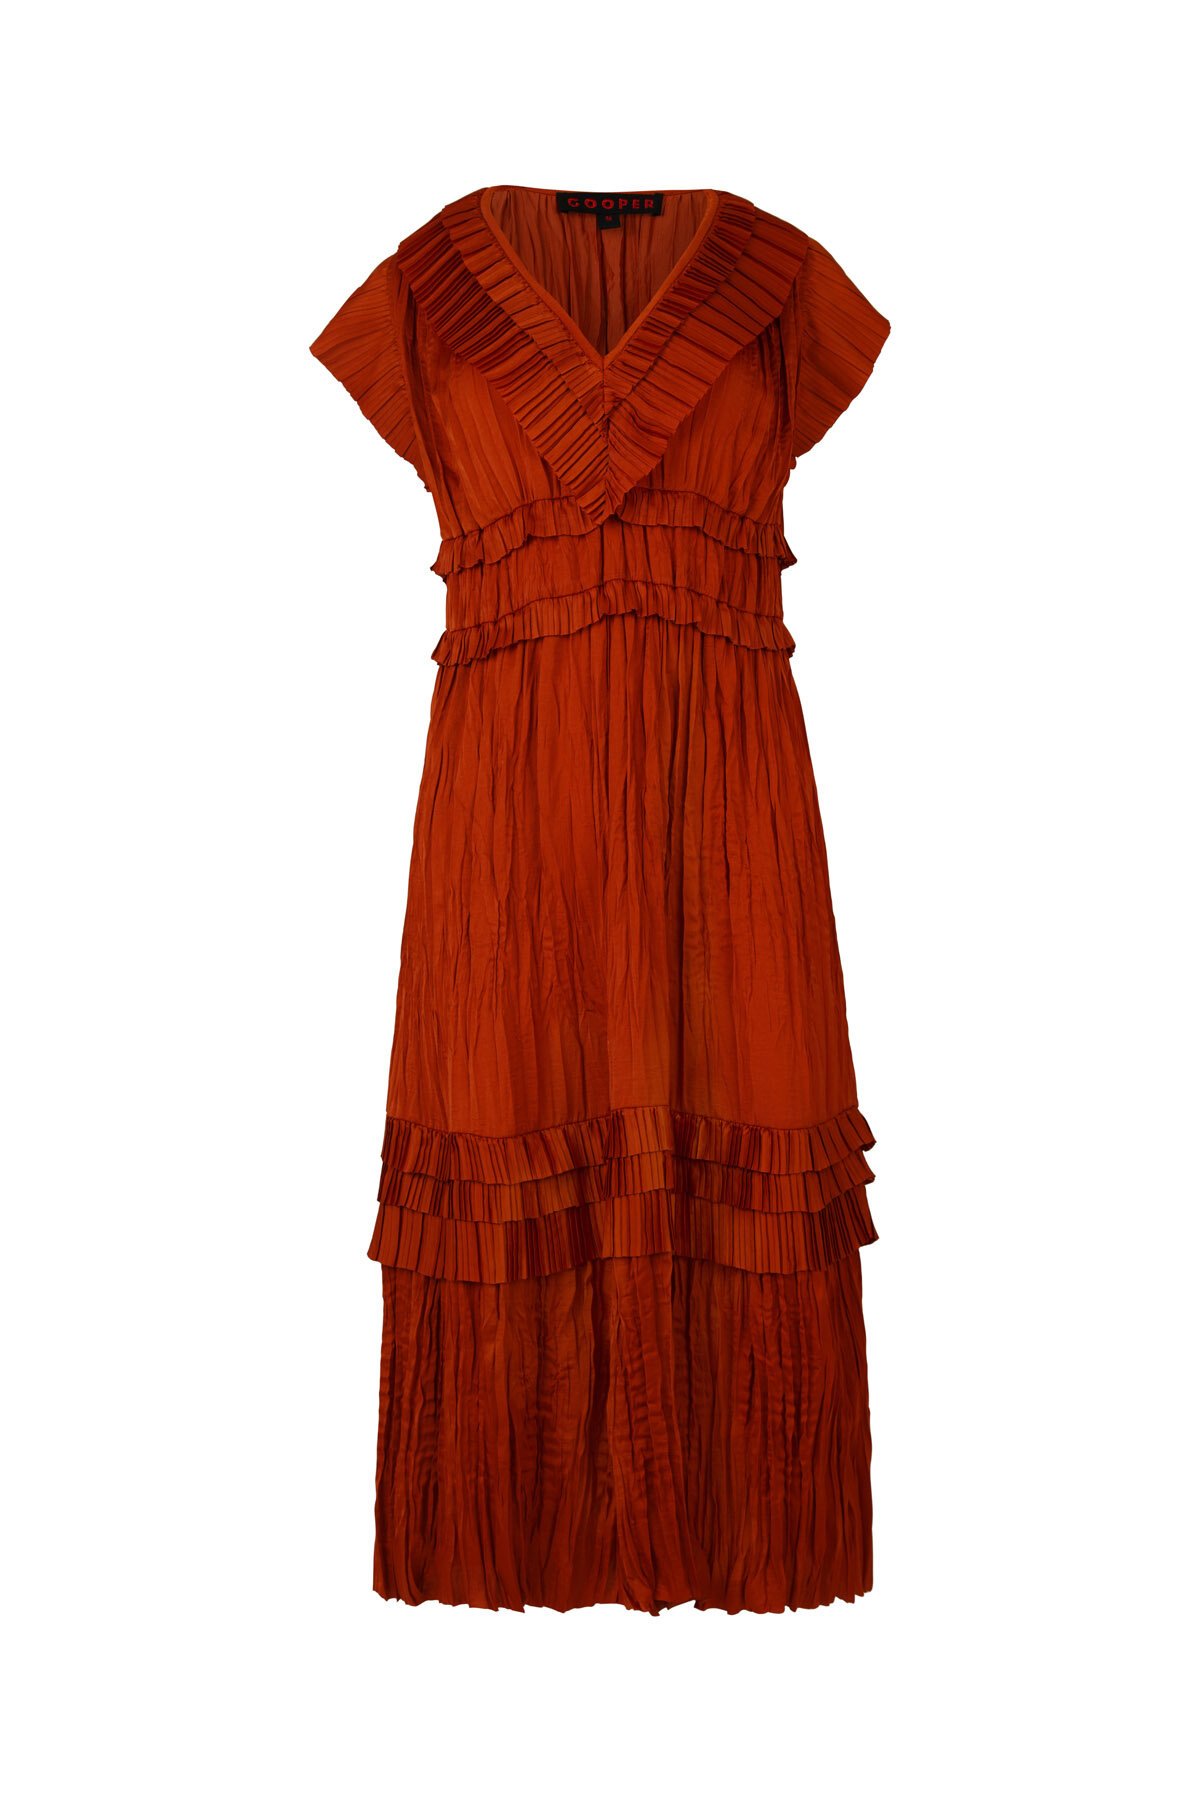 Cooper DRESSING ON THE SIDE DRESS - Brand-Cooper : Diahann Boutique ...